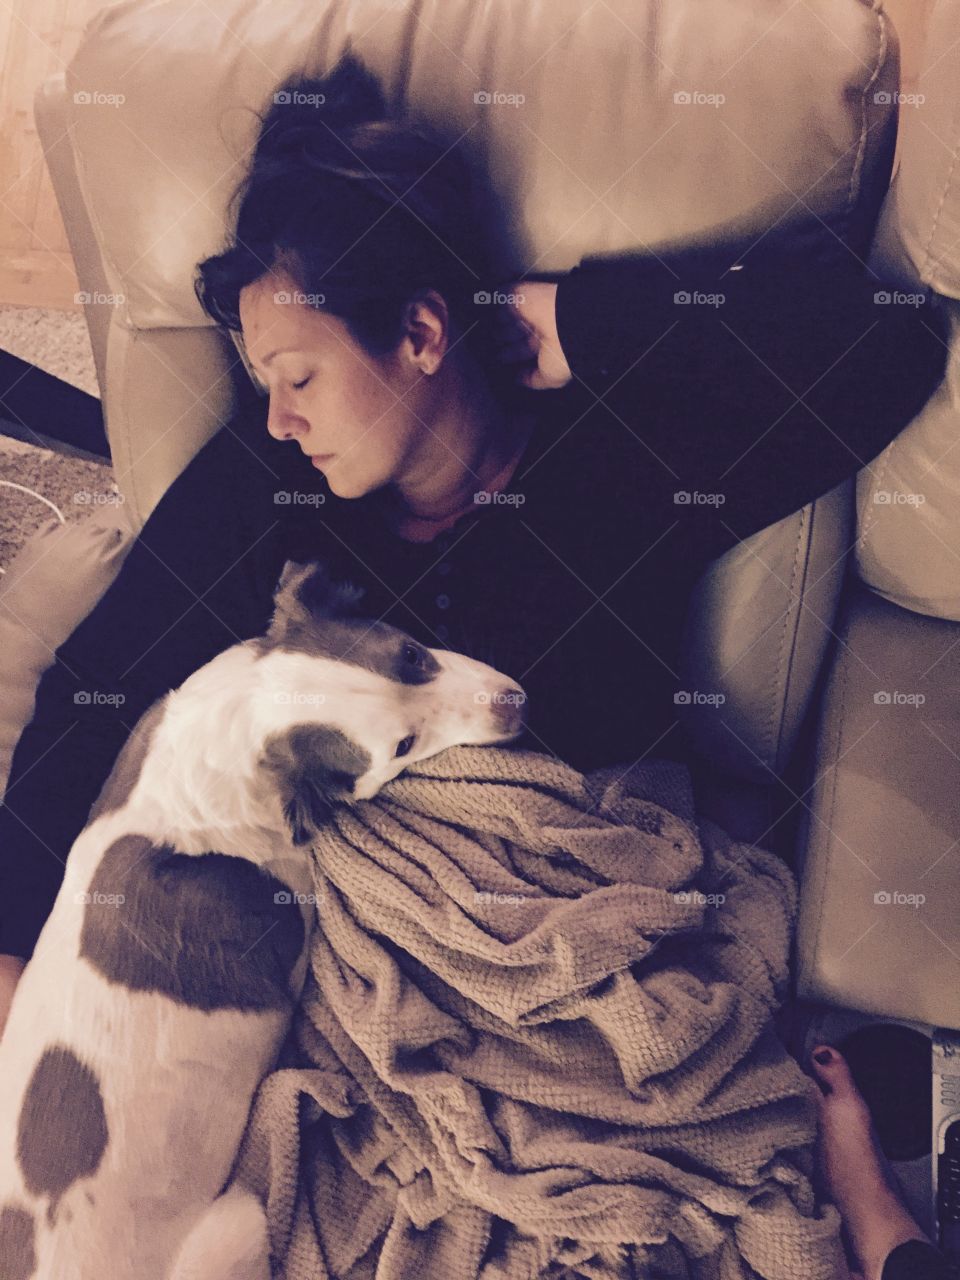 Elevated view of woman and pet dog sleeping